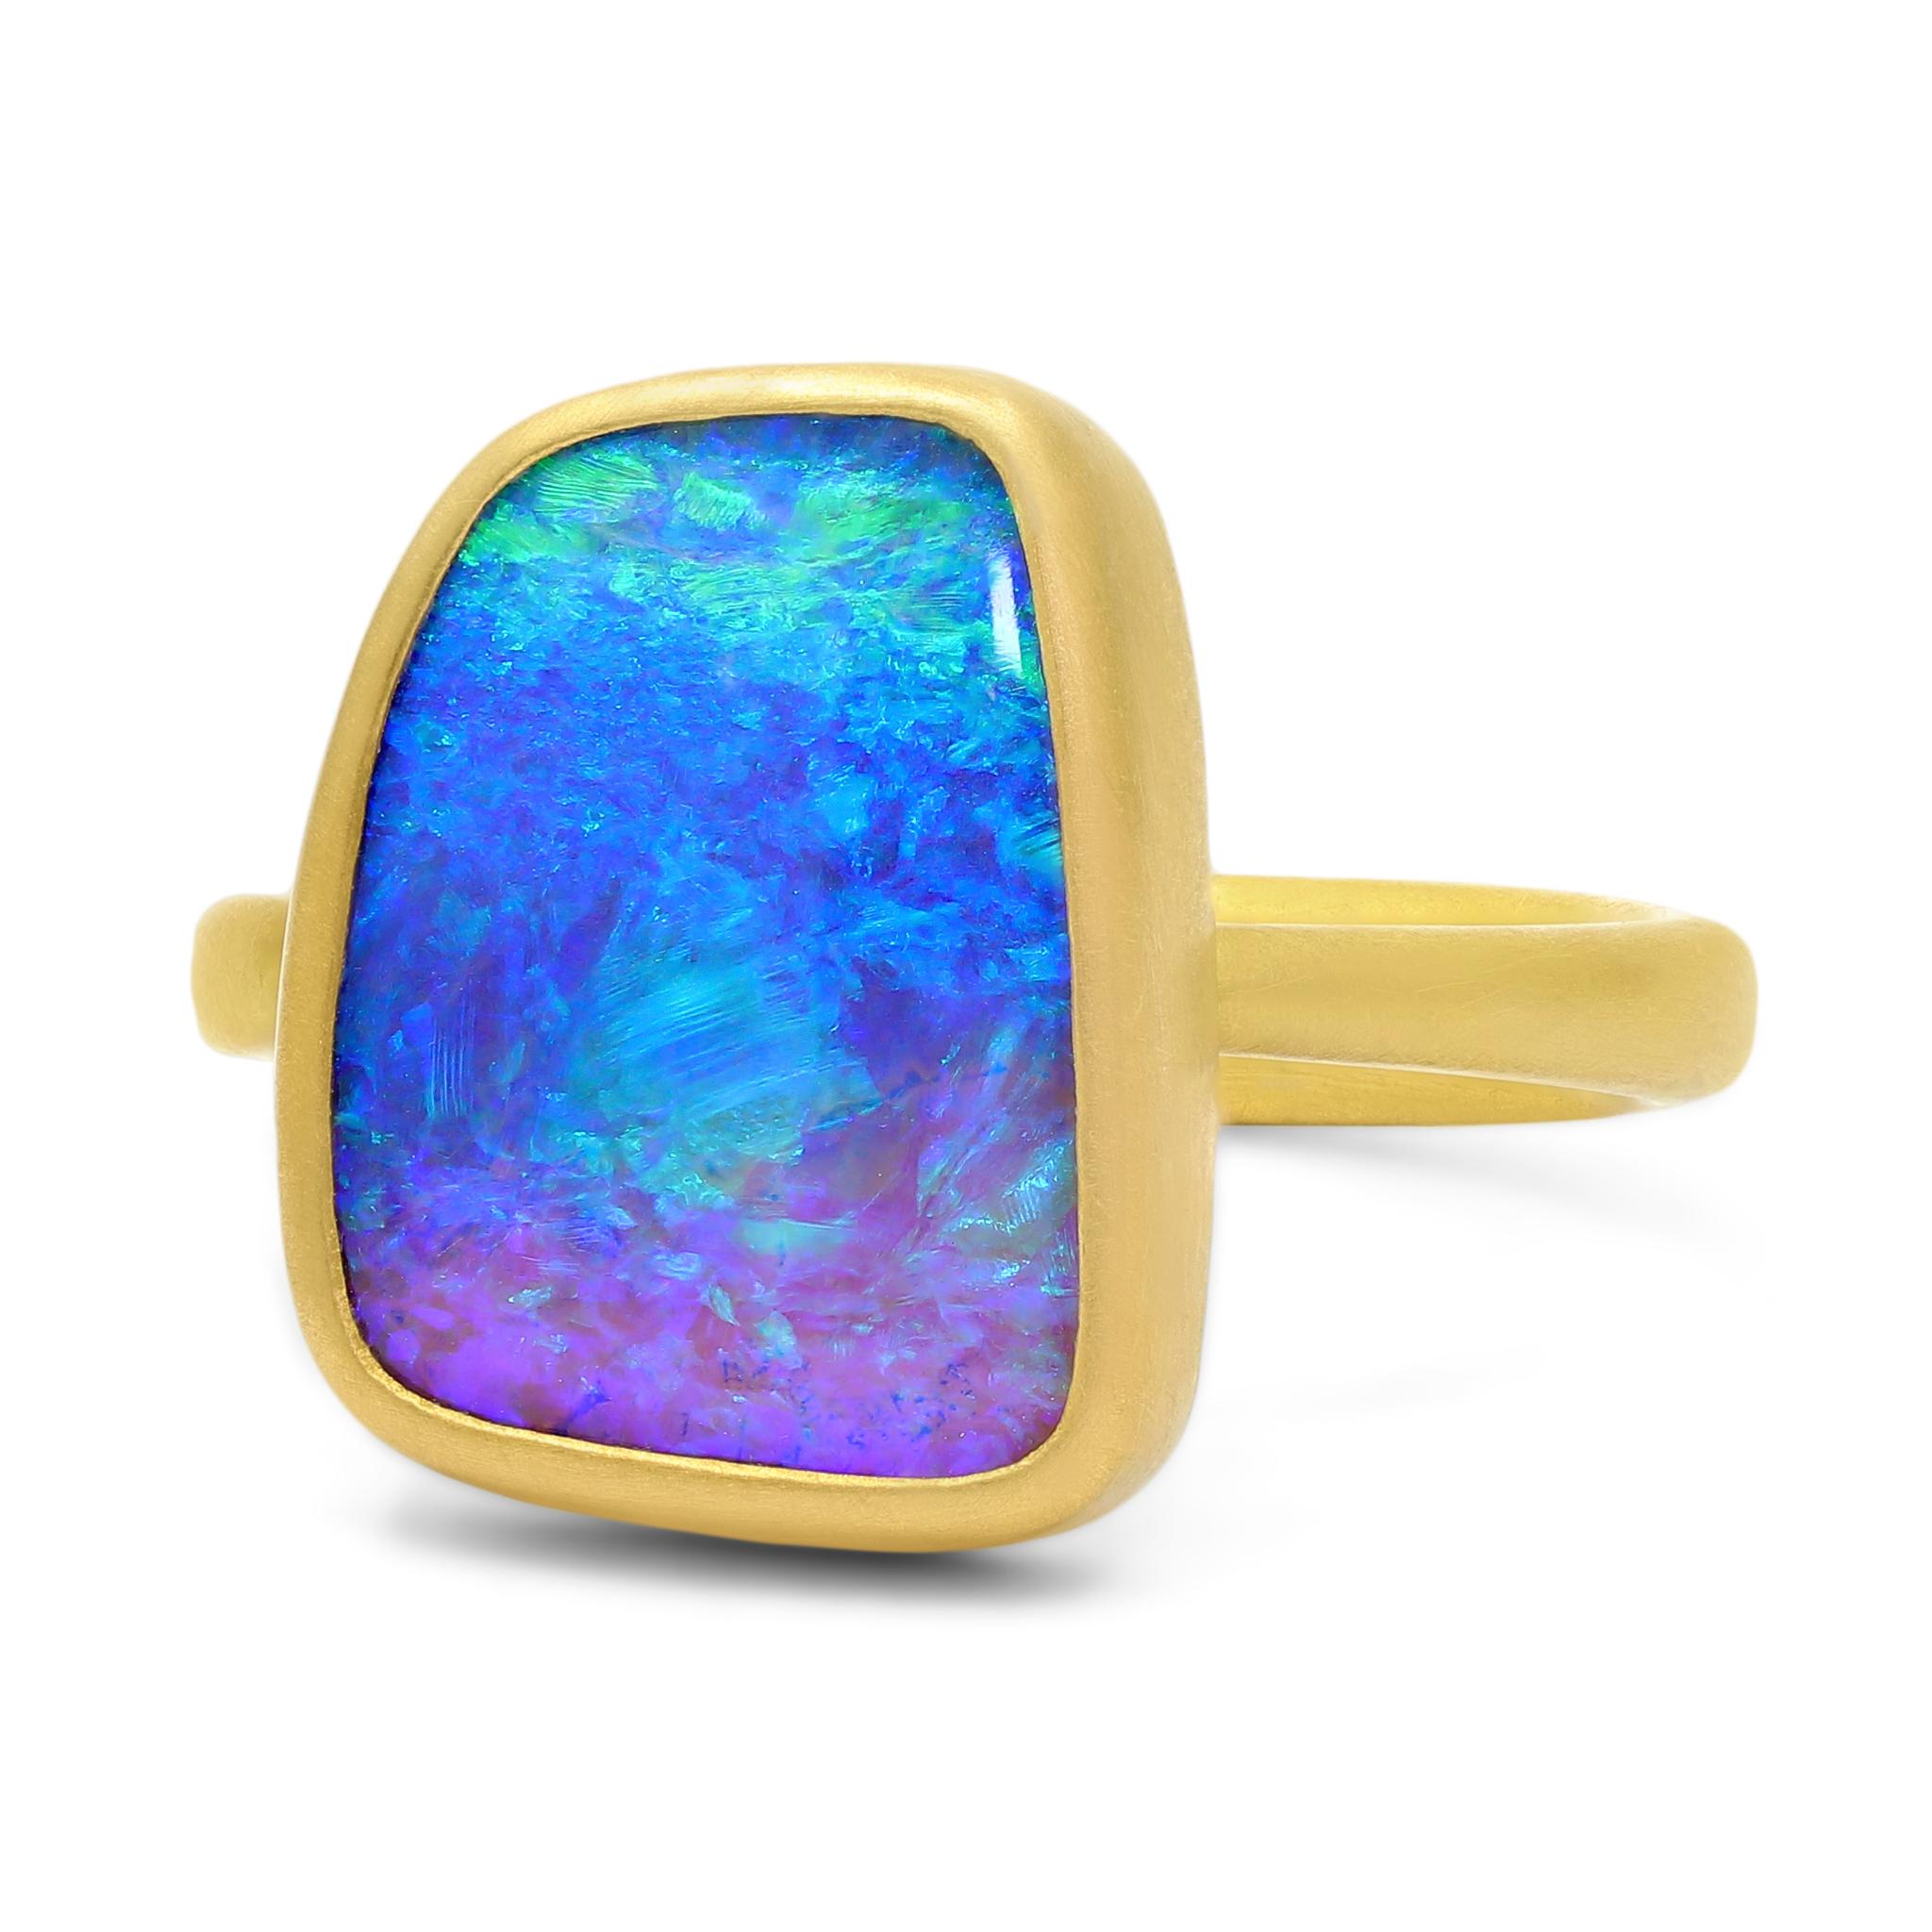 One of a Kind Ring by jewelry maker Lola Brooks hand-fabricated in matte-finished 22k yellow gold featuring a breathtaking 5.84 carat ultramarine boulder opal with ombre coloration and electrifying green, blue and purple flash, bezel-set and